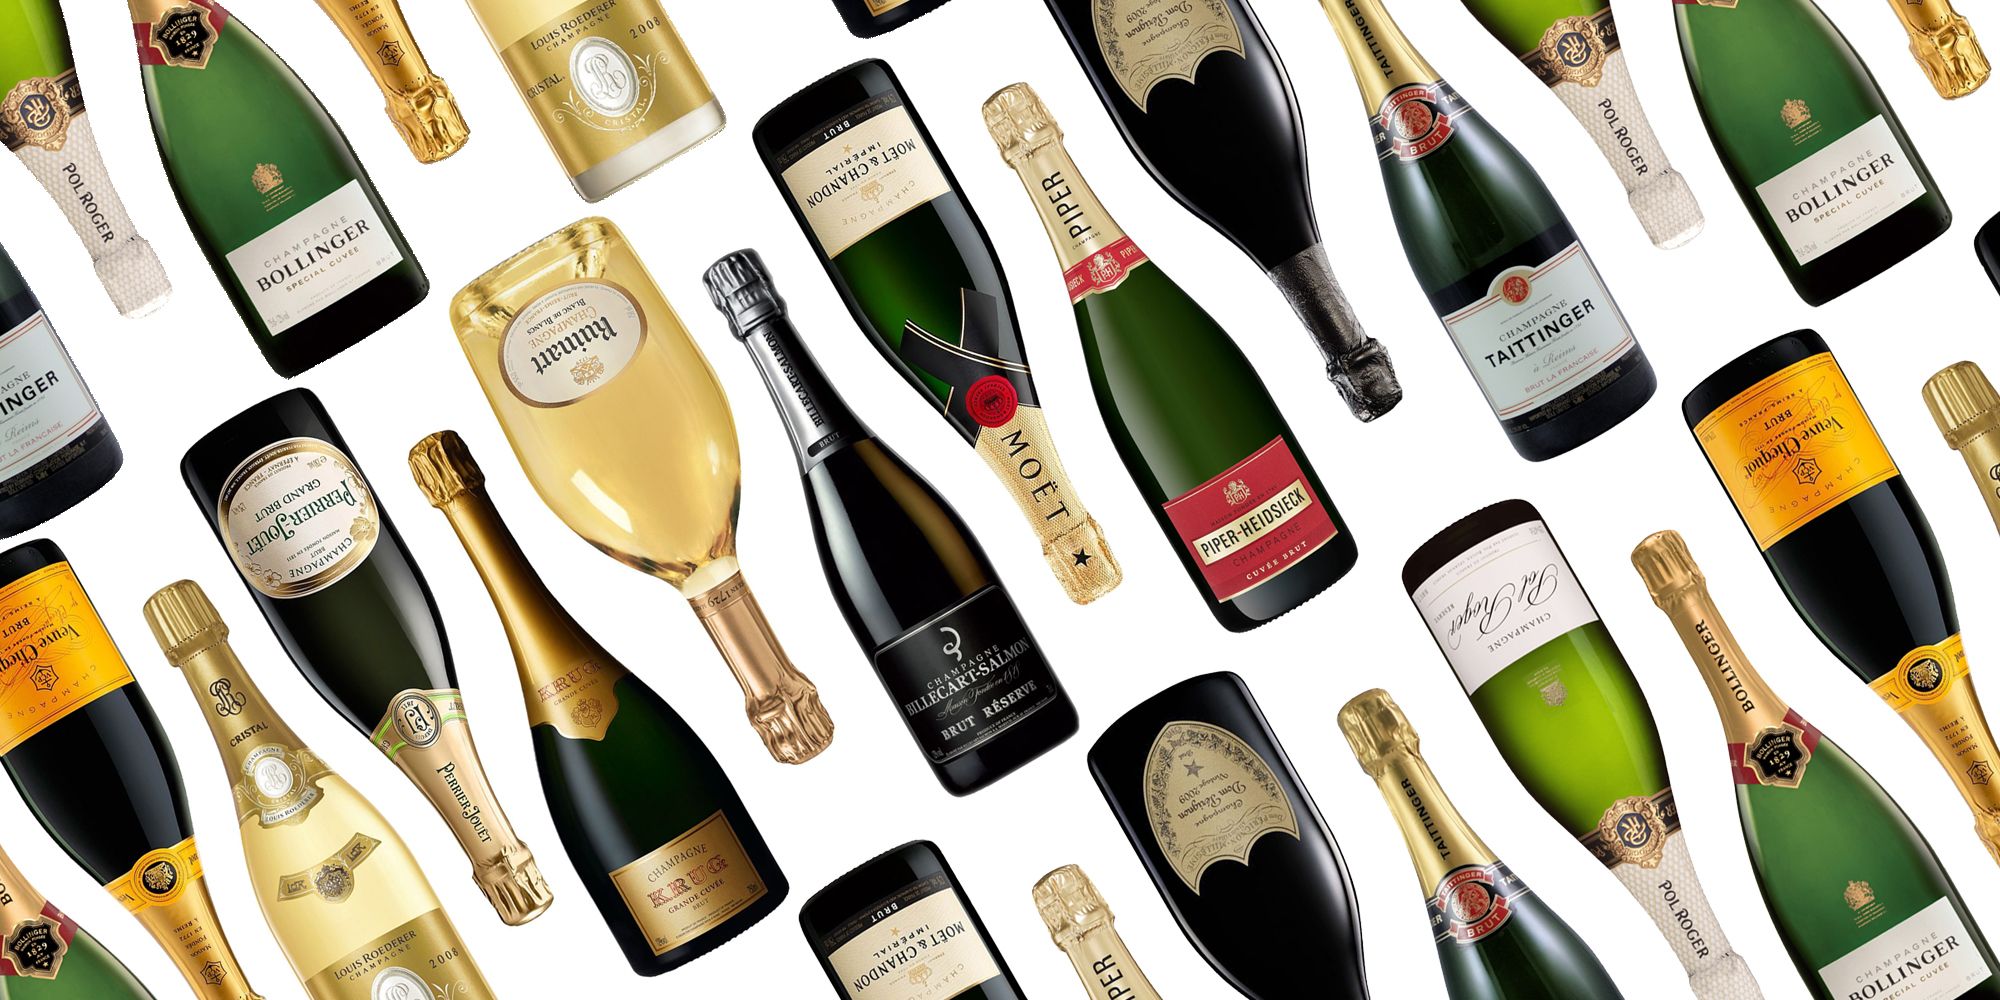 15 Best Champagne Brands For Our Favorite Champagnes To Sip